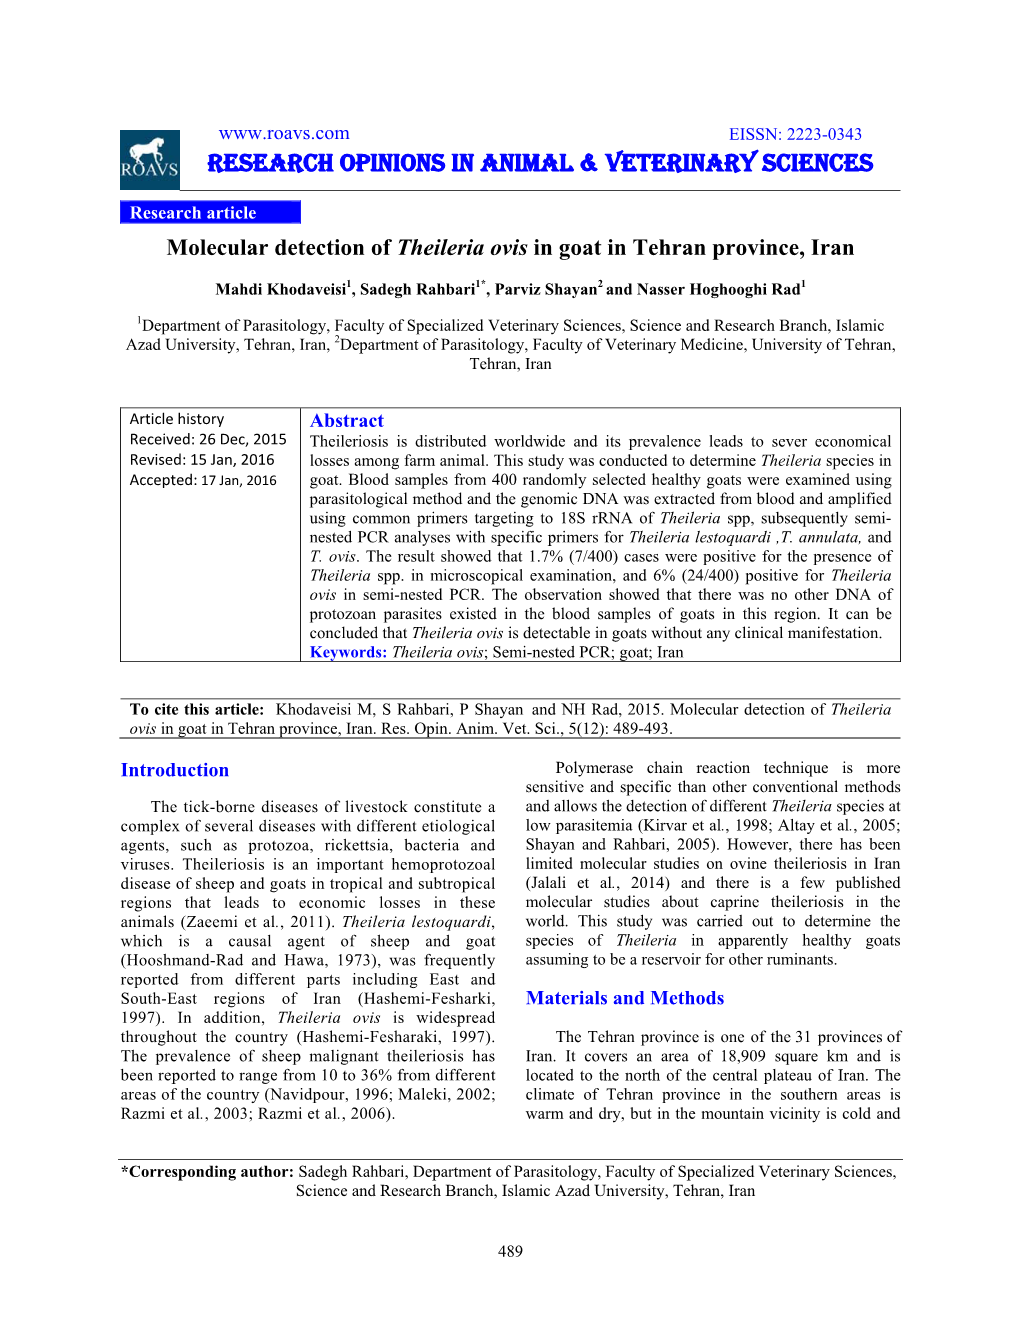 Research Opinions in Animal & Veterinary